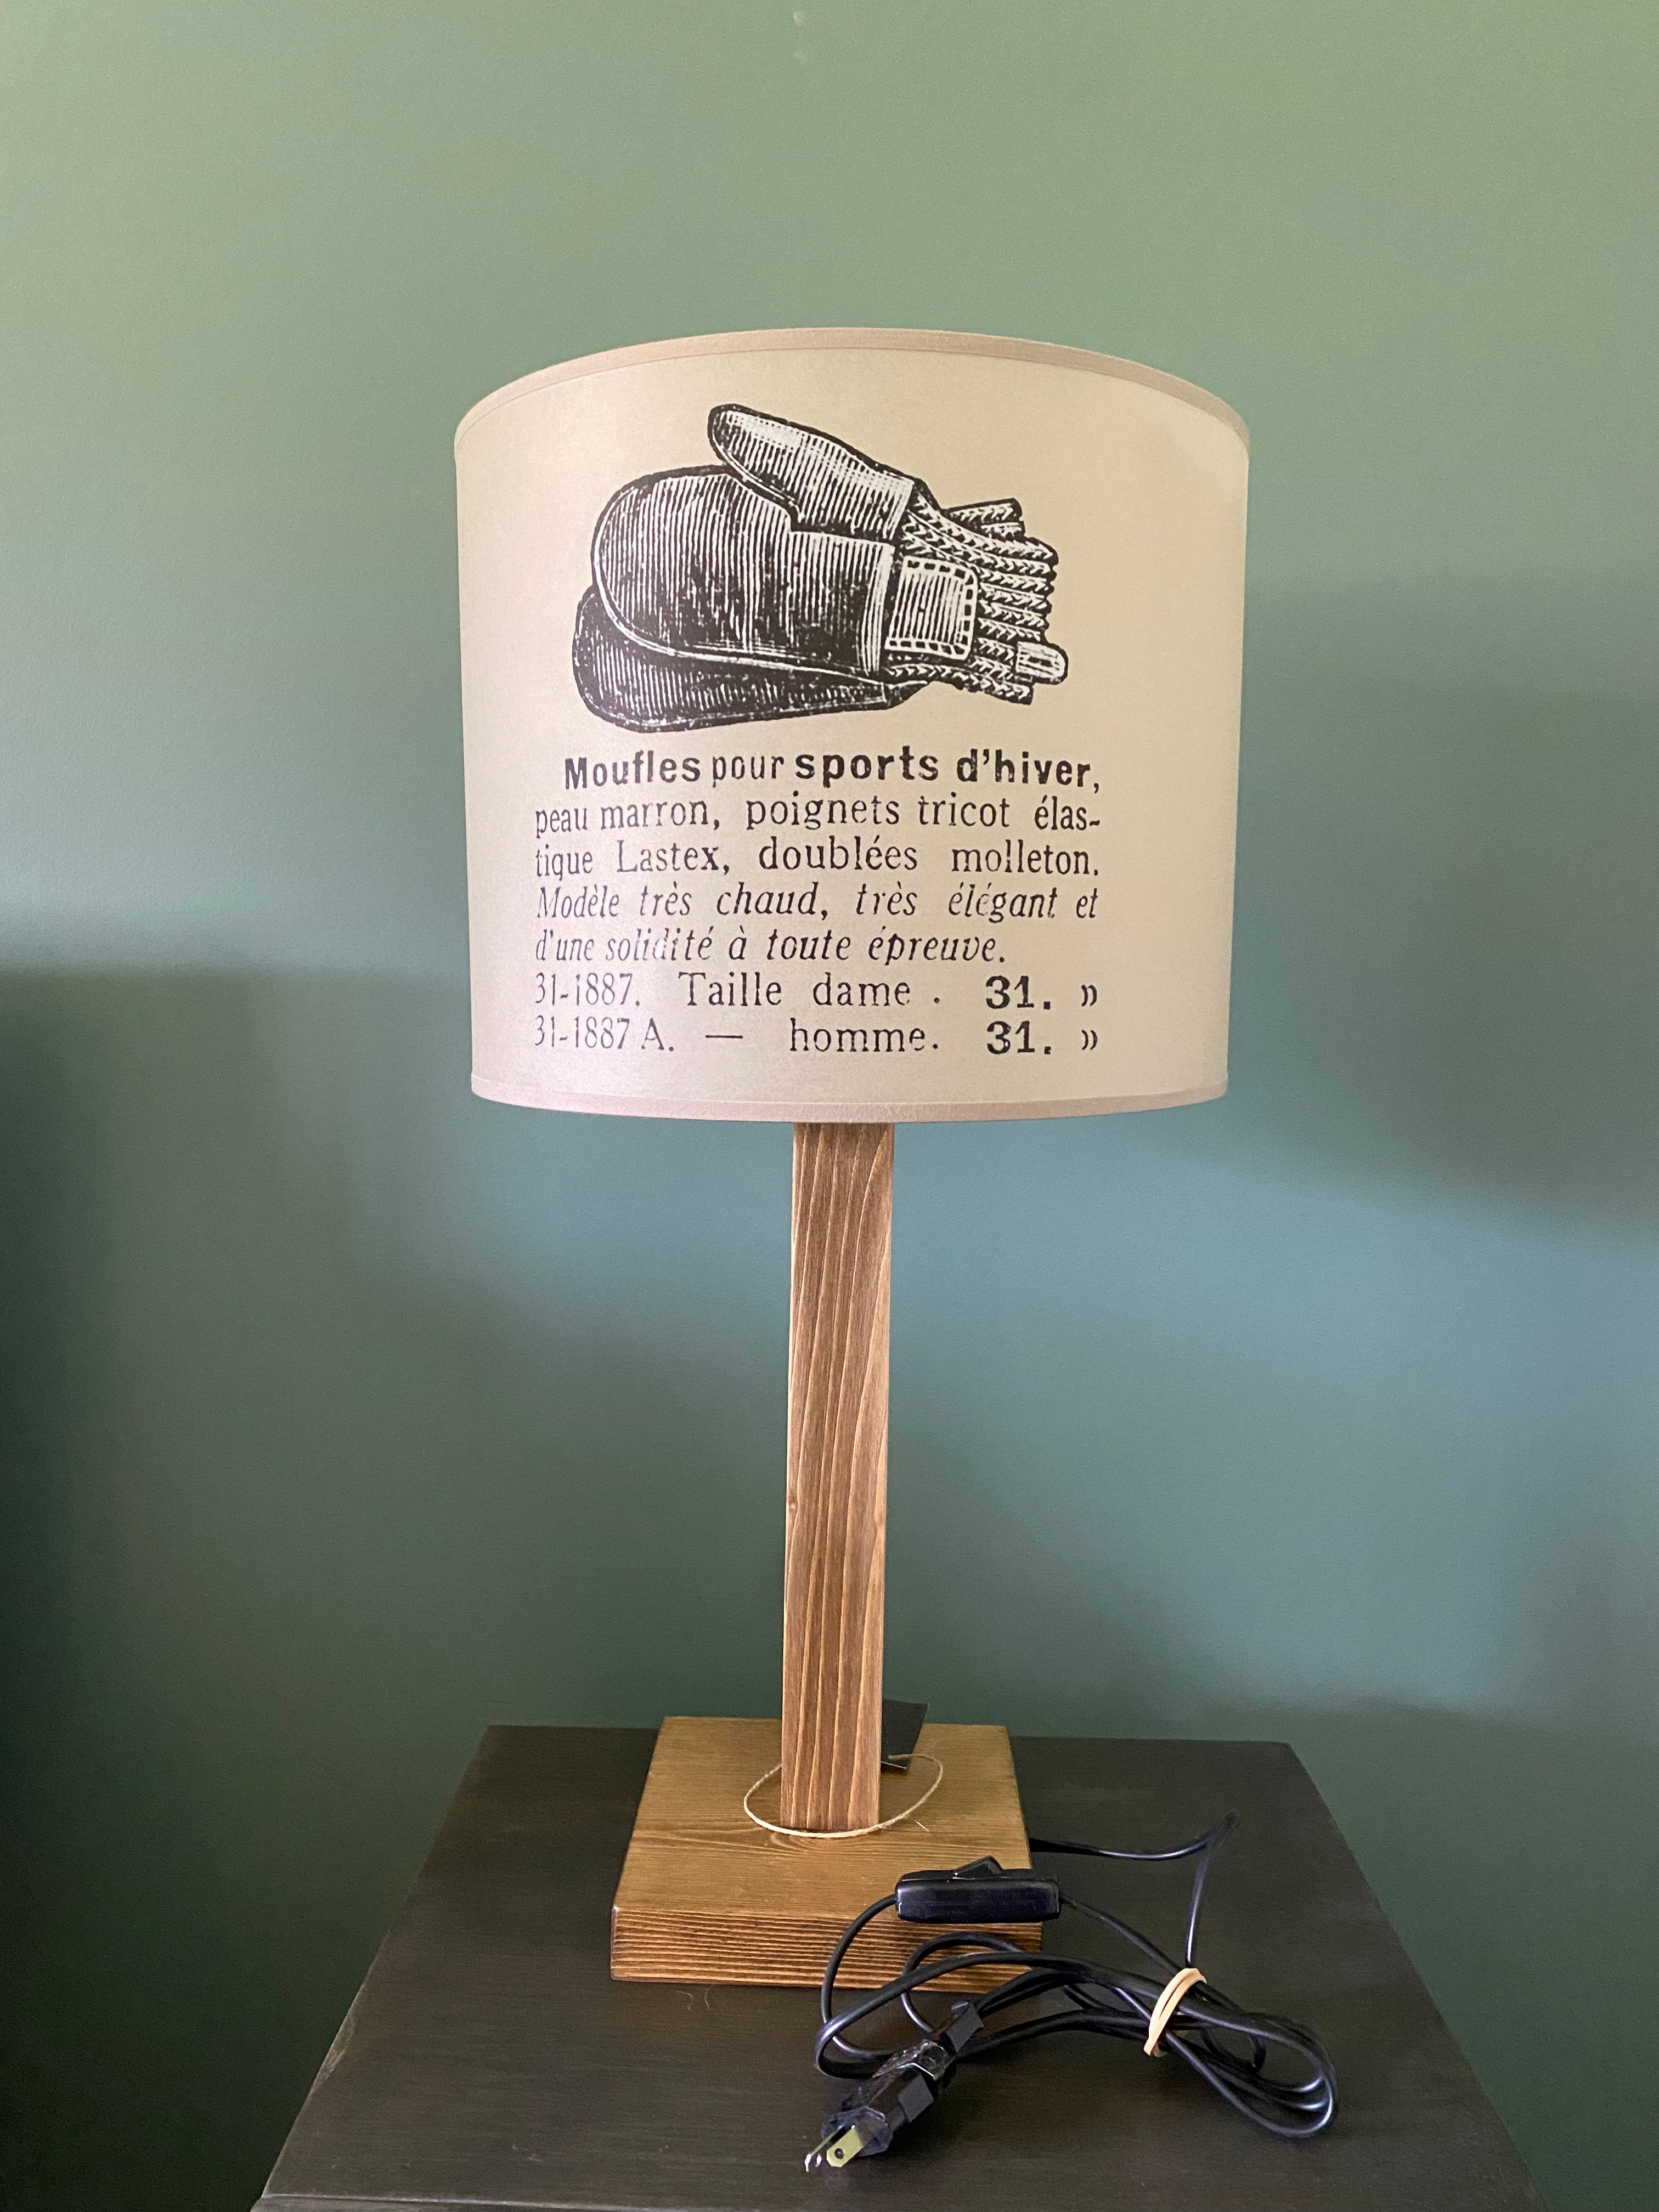 Lamp with a square solid wooden base and square stem holding up the canvas printed beige lamp shade. The beige shade shows a vintage black & white drawing of a pair of woollen mittens and description in french of the mittens, showing the electrical cable. On a wooden table against a green wall.